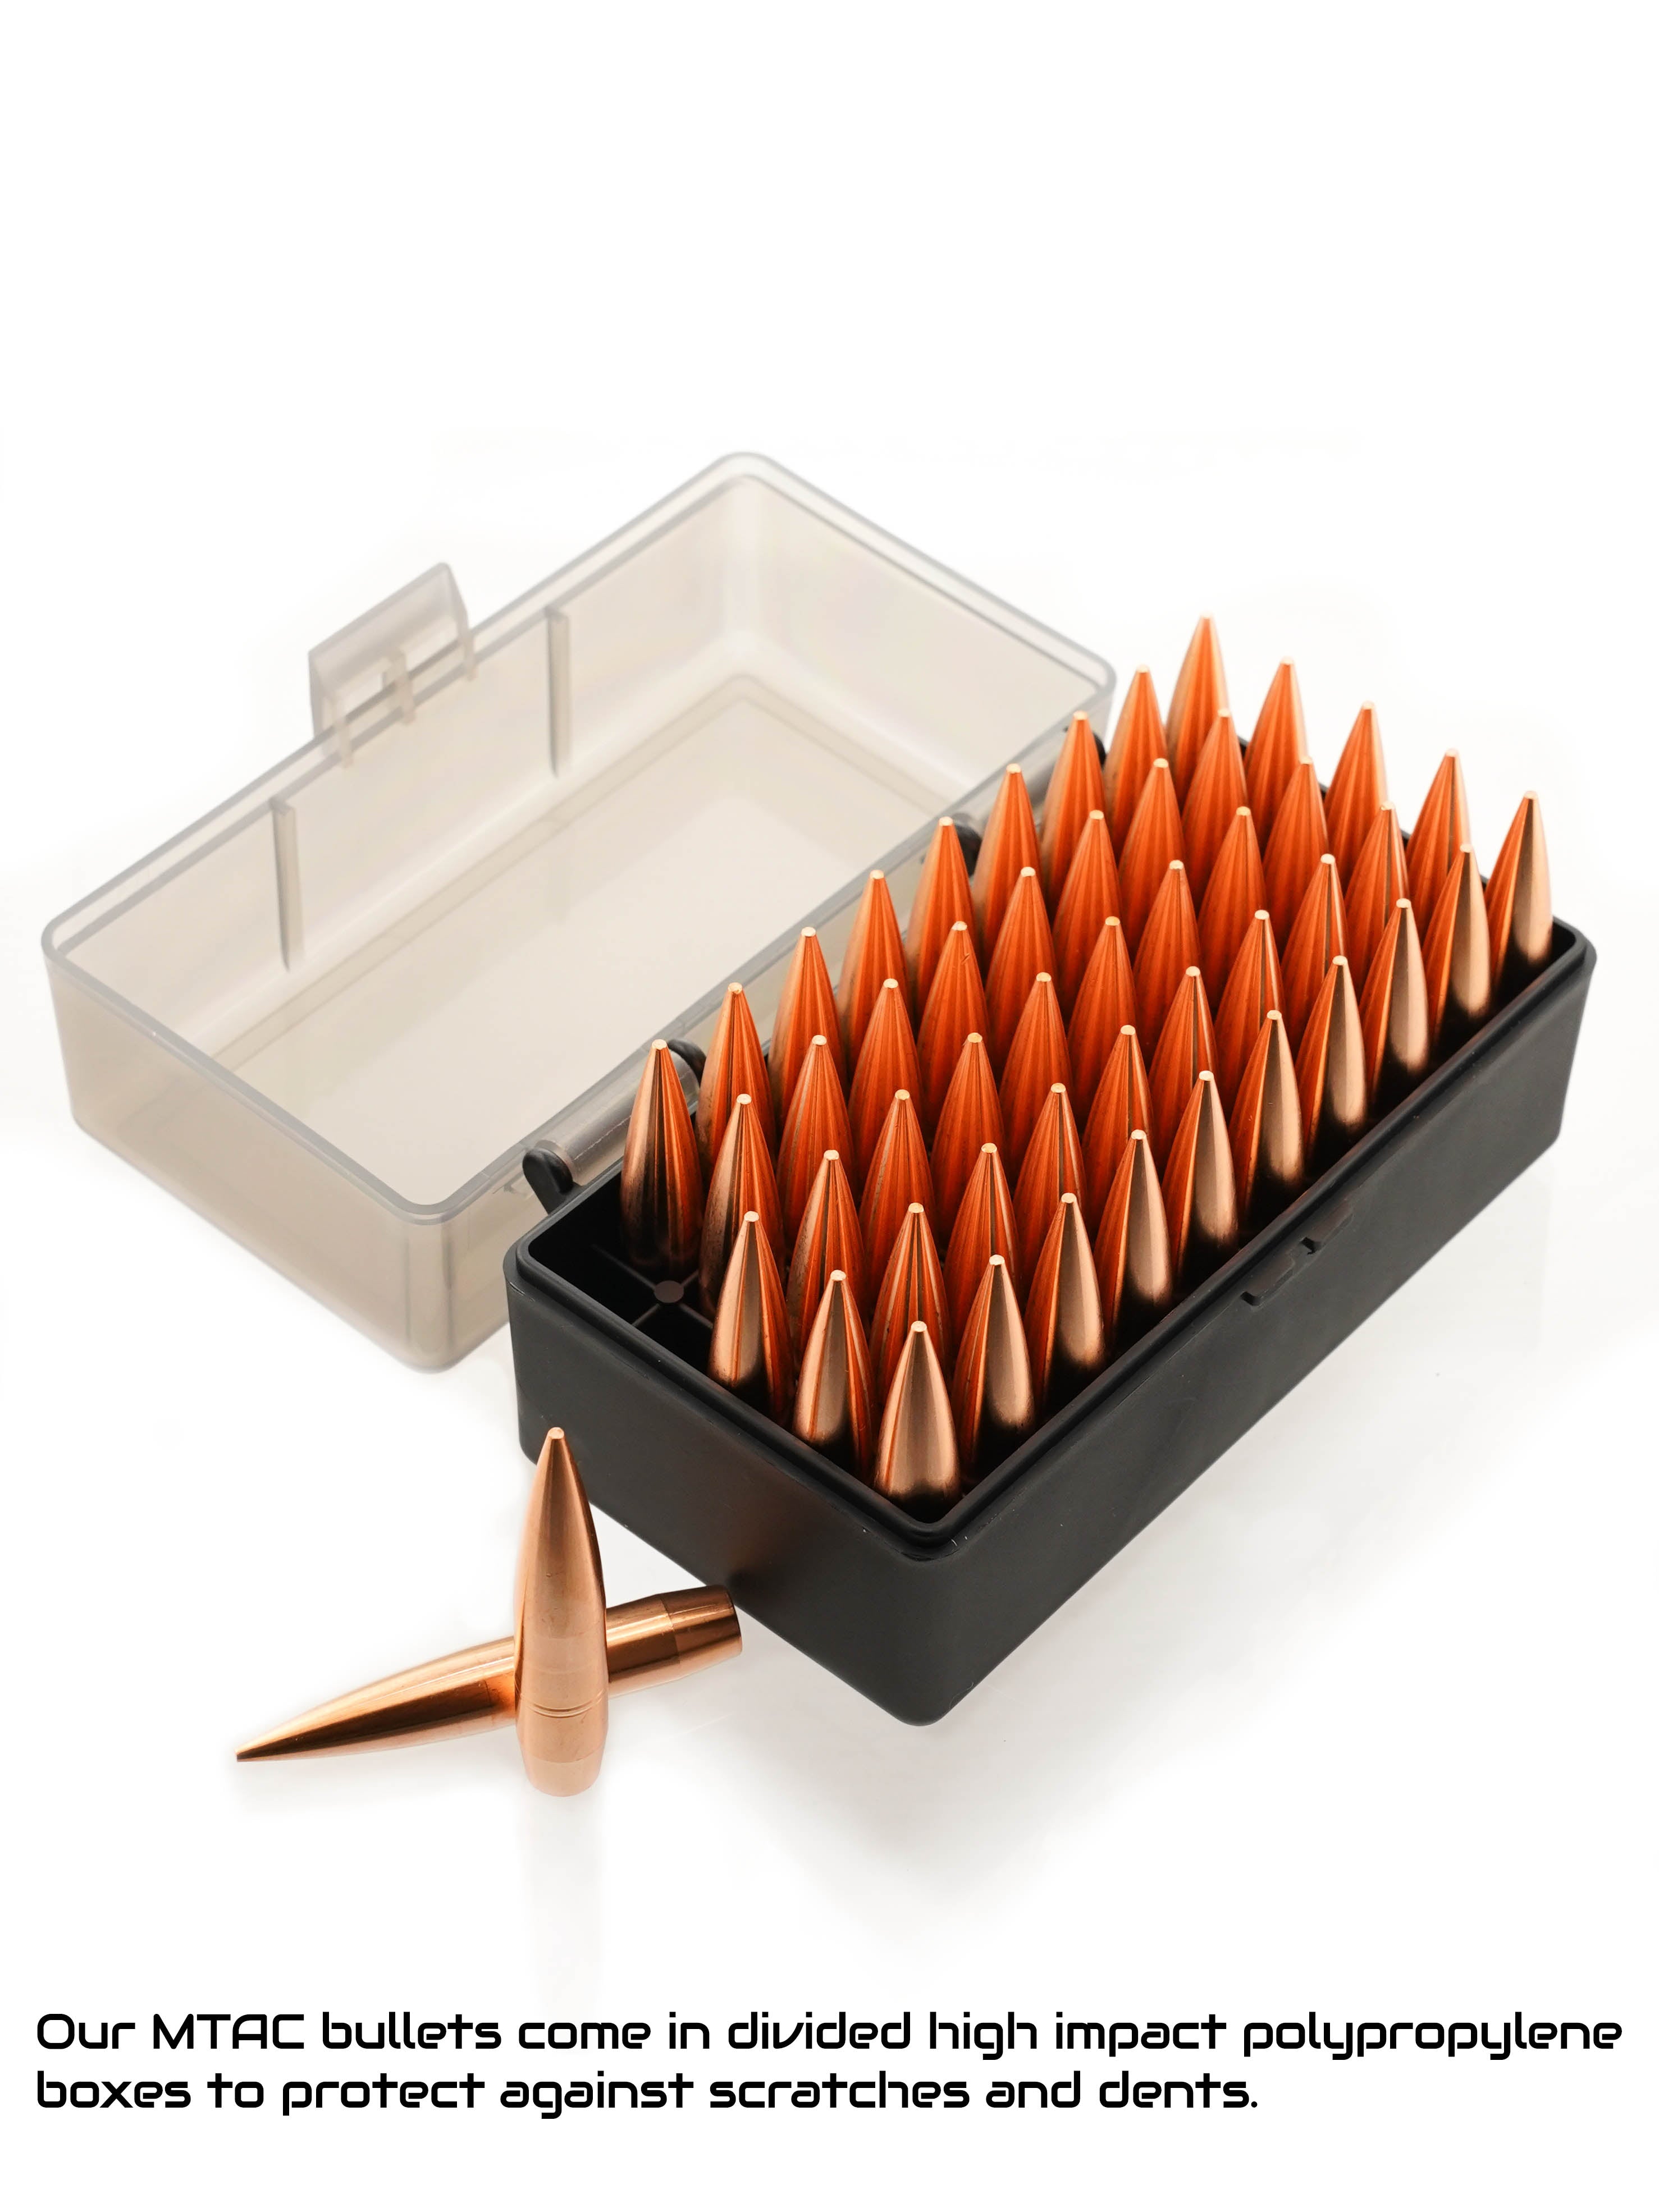 .416 525gr SINGLE FEED MTAC (Match/Tactical)